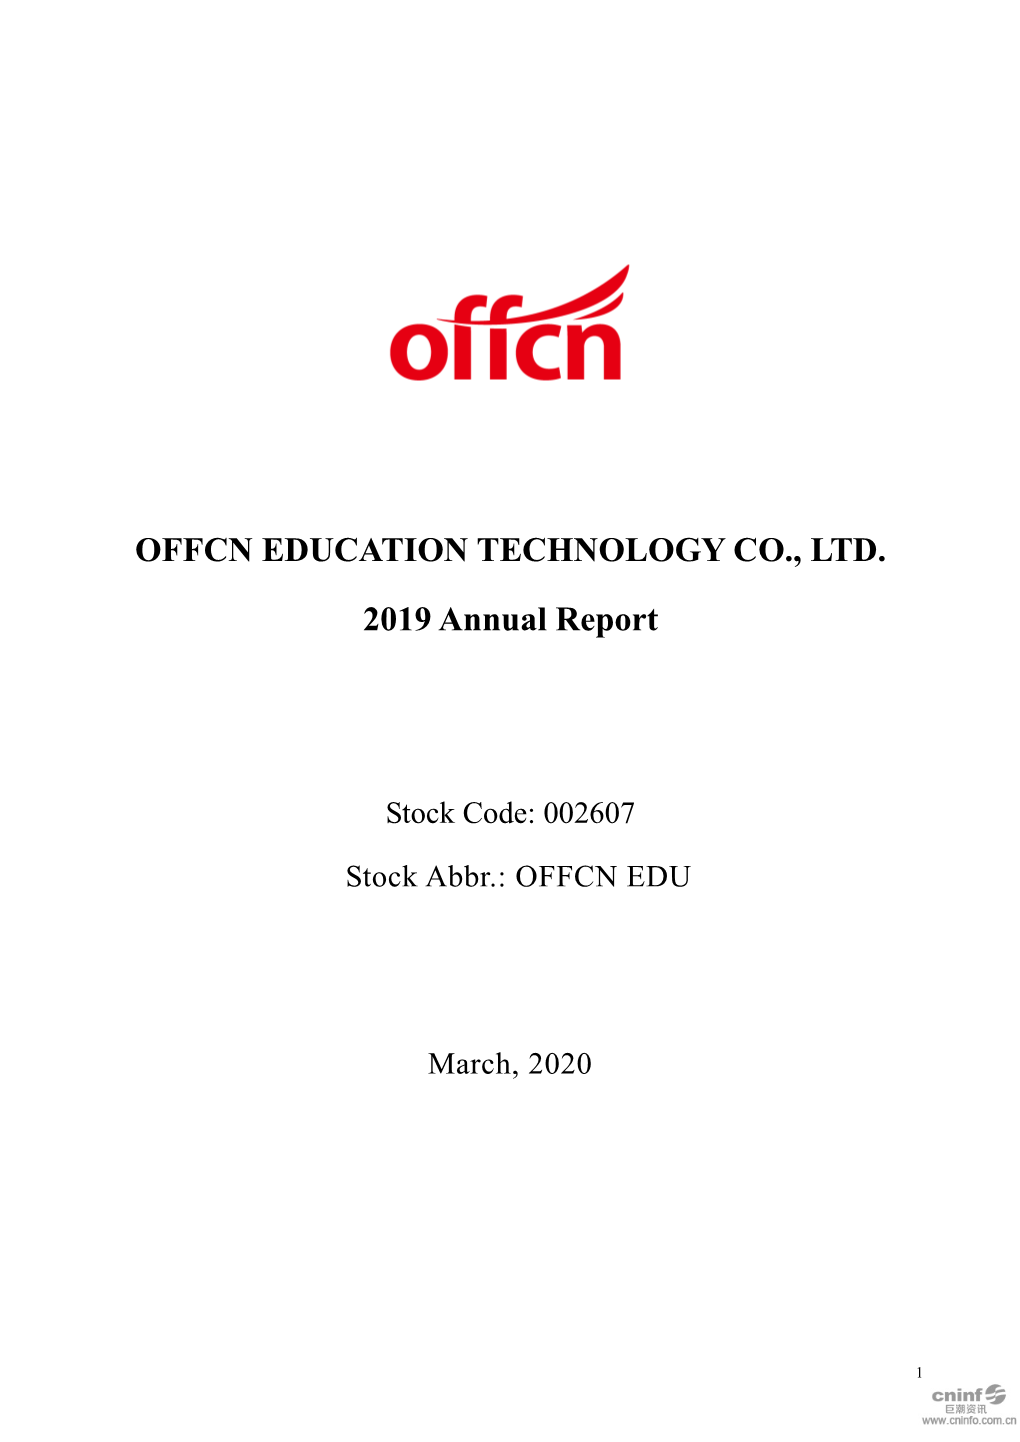 Offcn Education Technology Co., Ltd. 2019 Annual Report